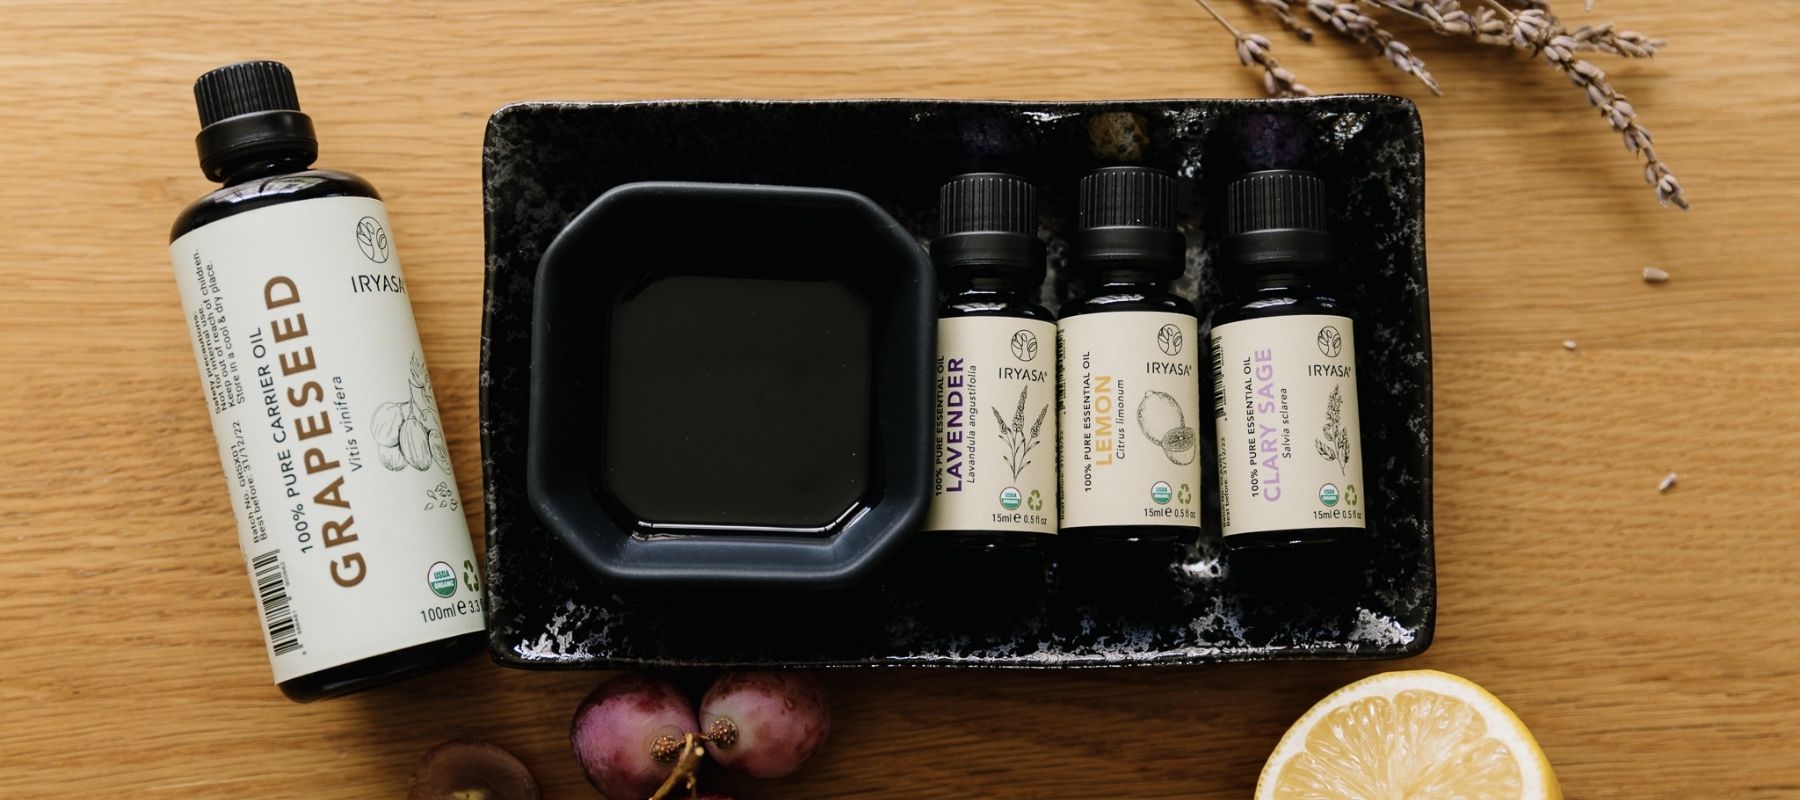 10 Essential Oil Blends For A Great Smelling Home - Clean & Fresh